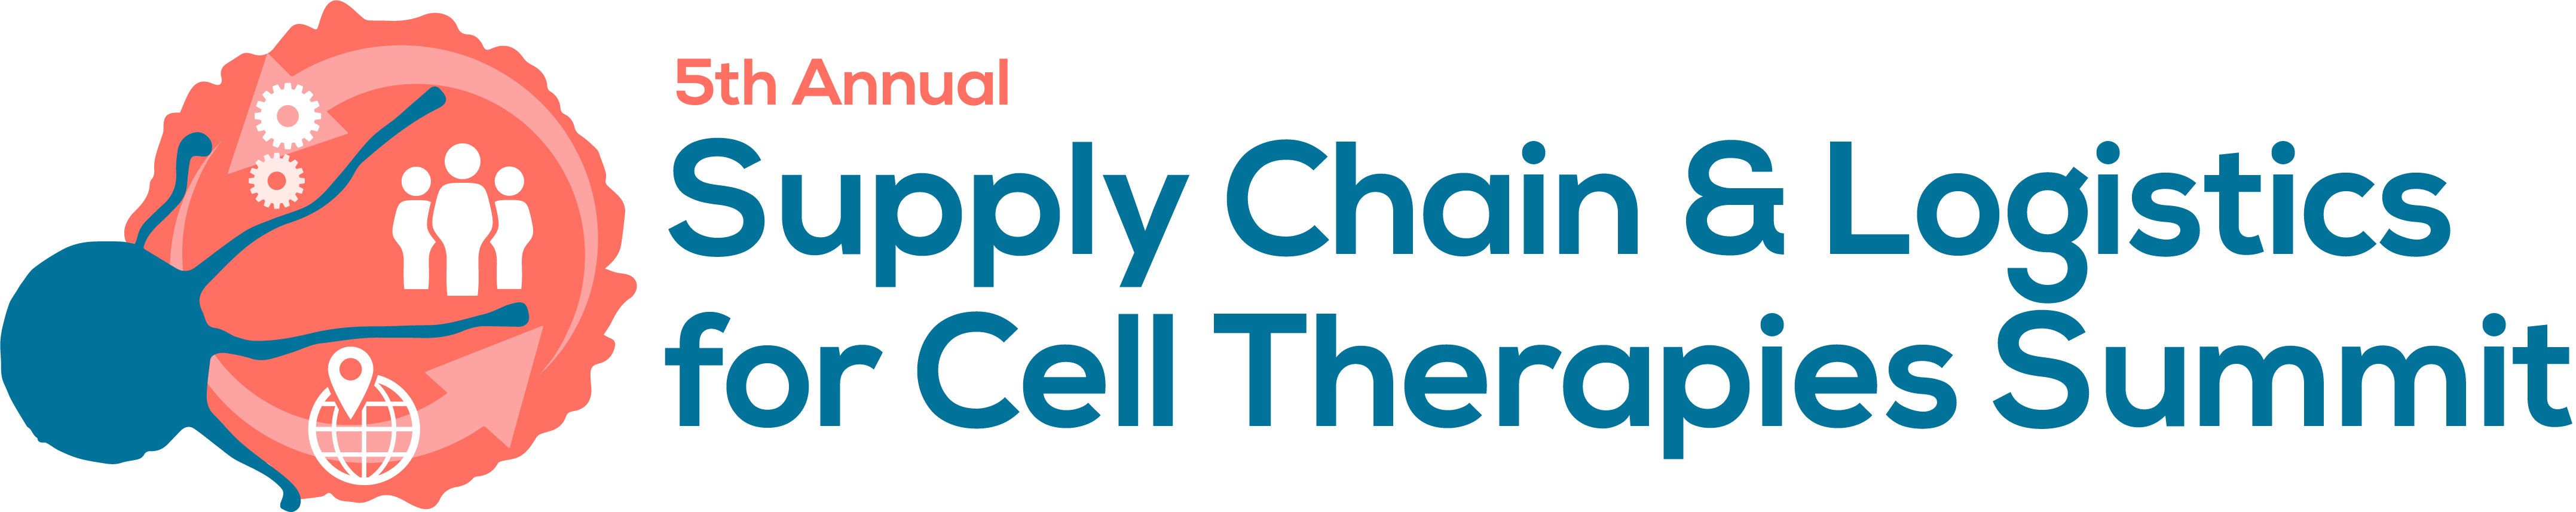 5th Annual Supply Chain& Logistics for Cell Therapies Summit NO STRAPLINE